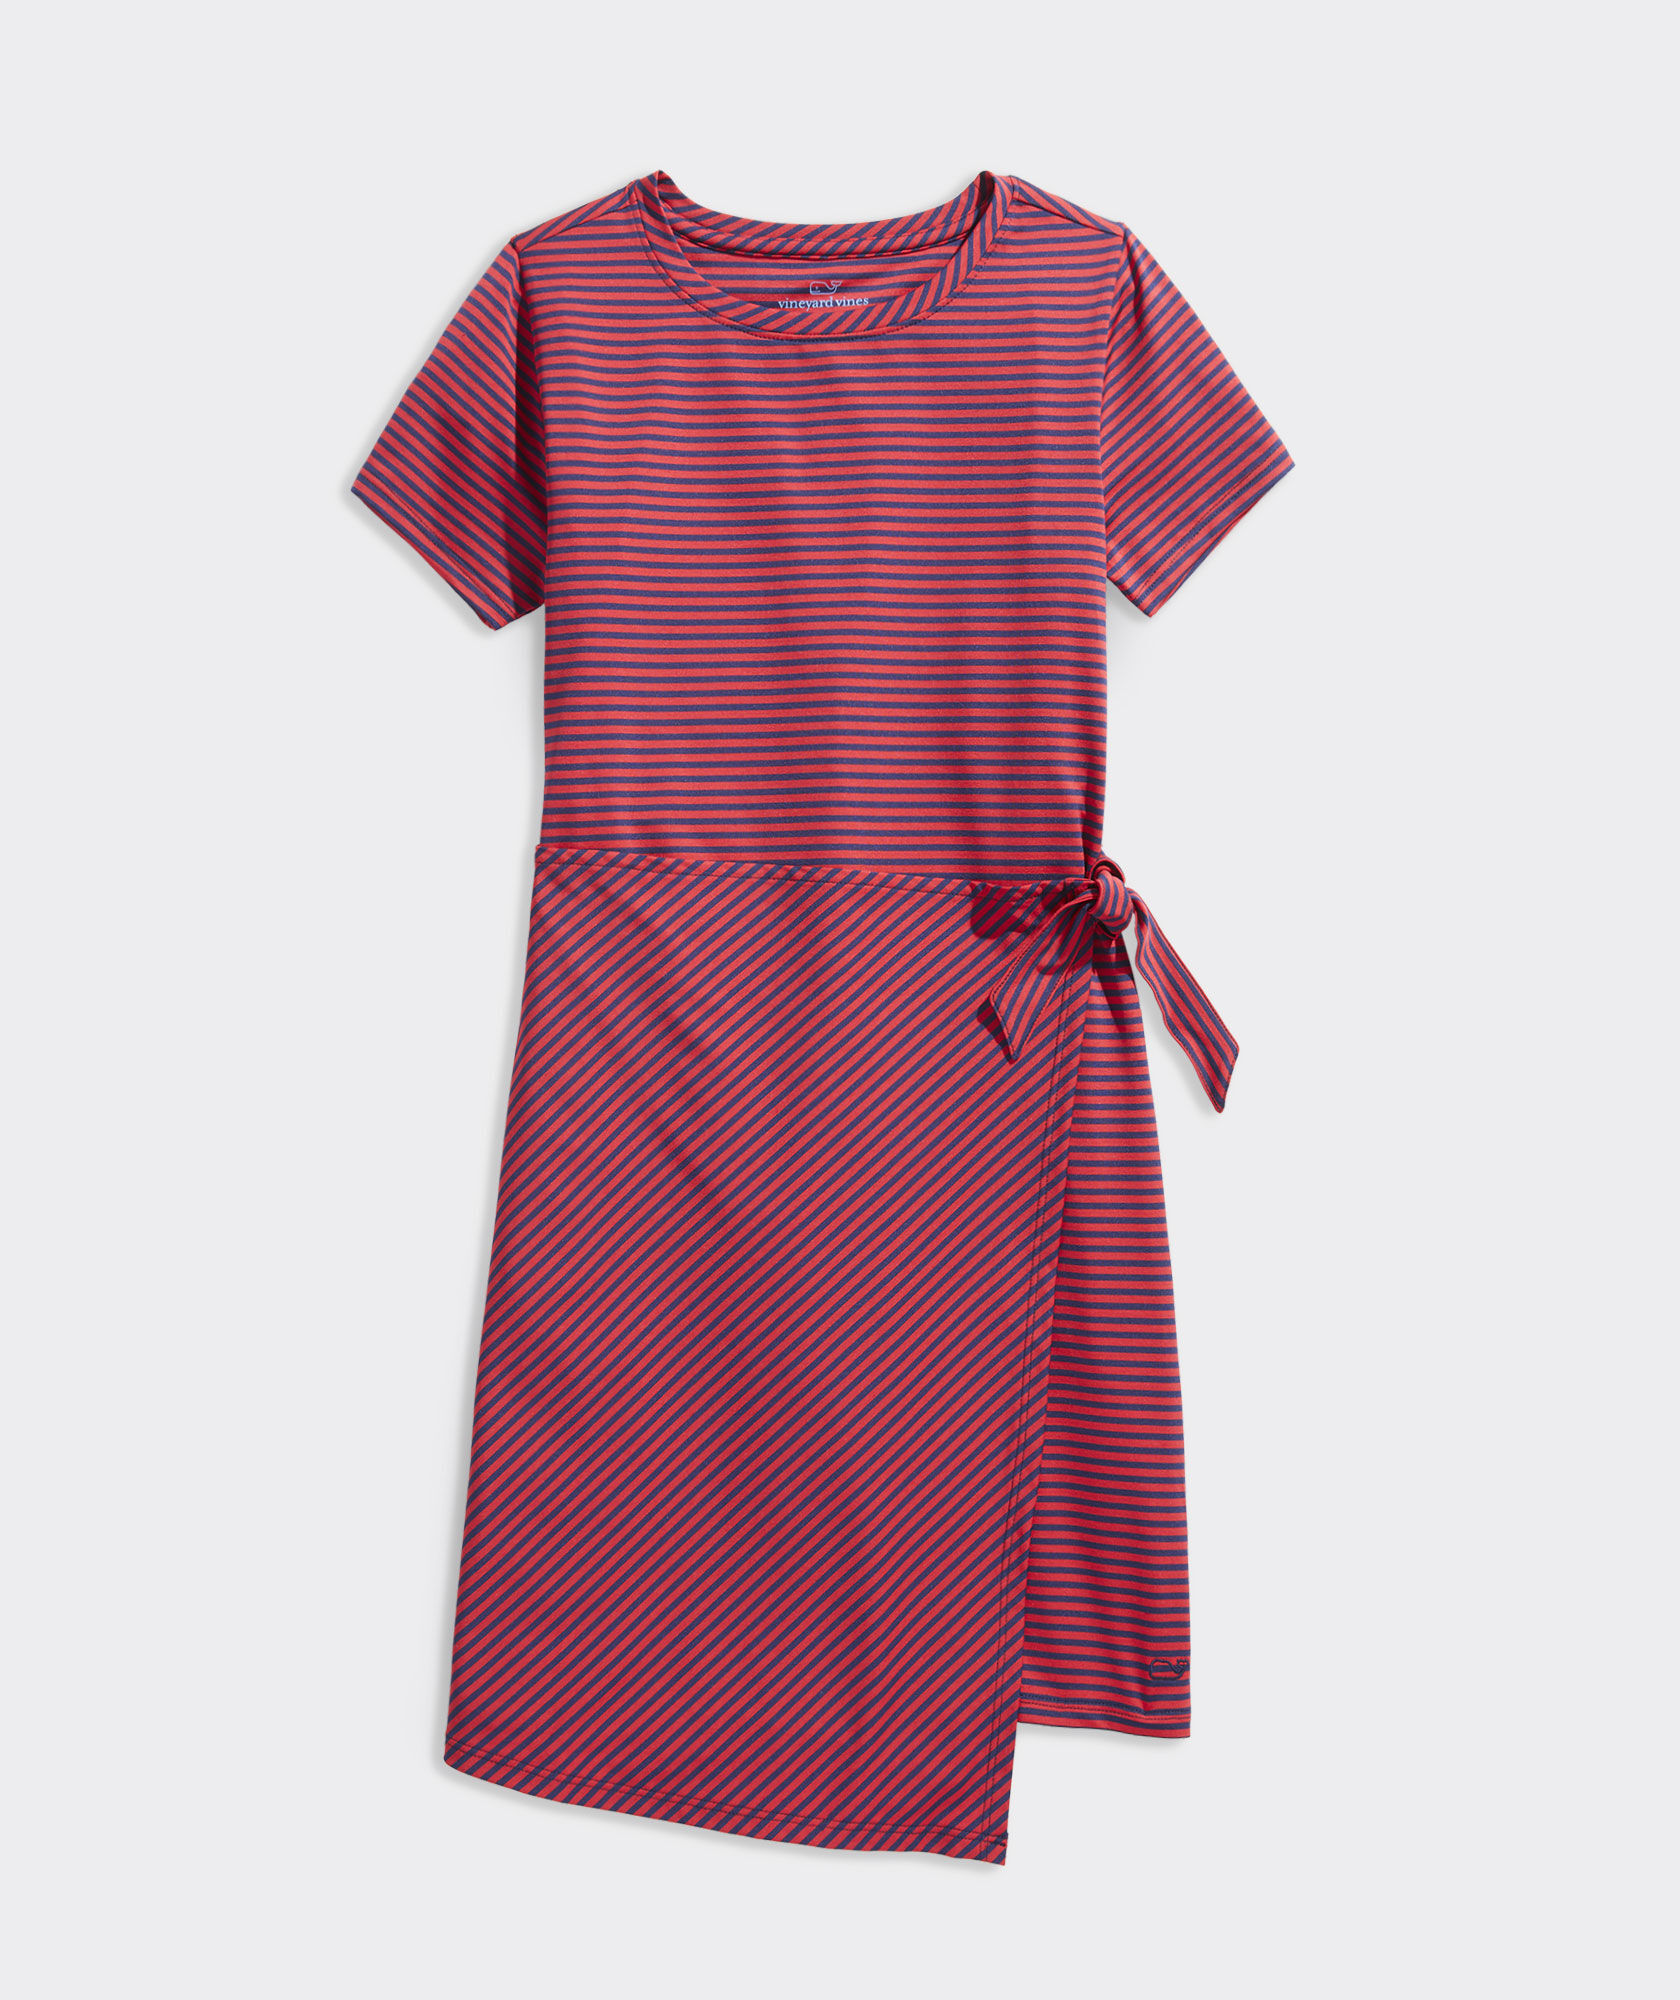 Shop Girls Dresses & Rompers - Toddler and Girls Sizes at vineyard 